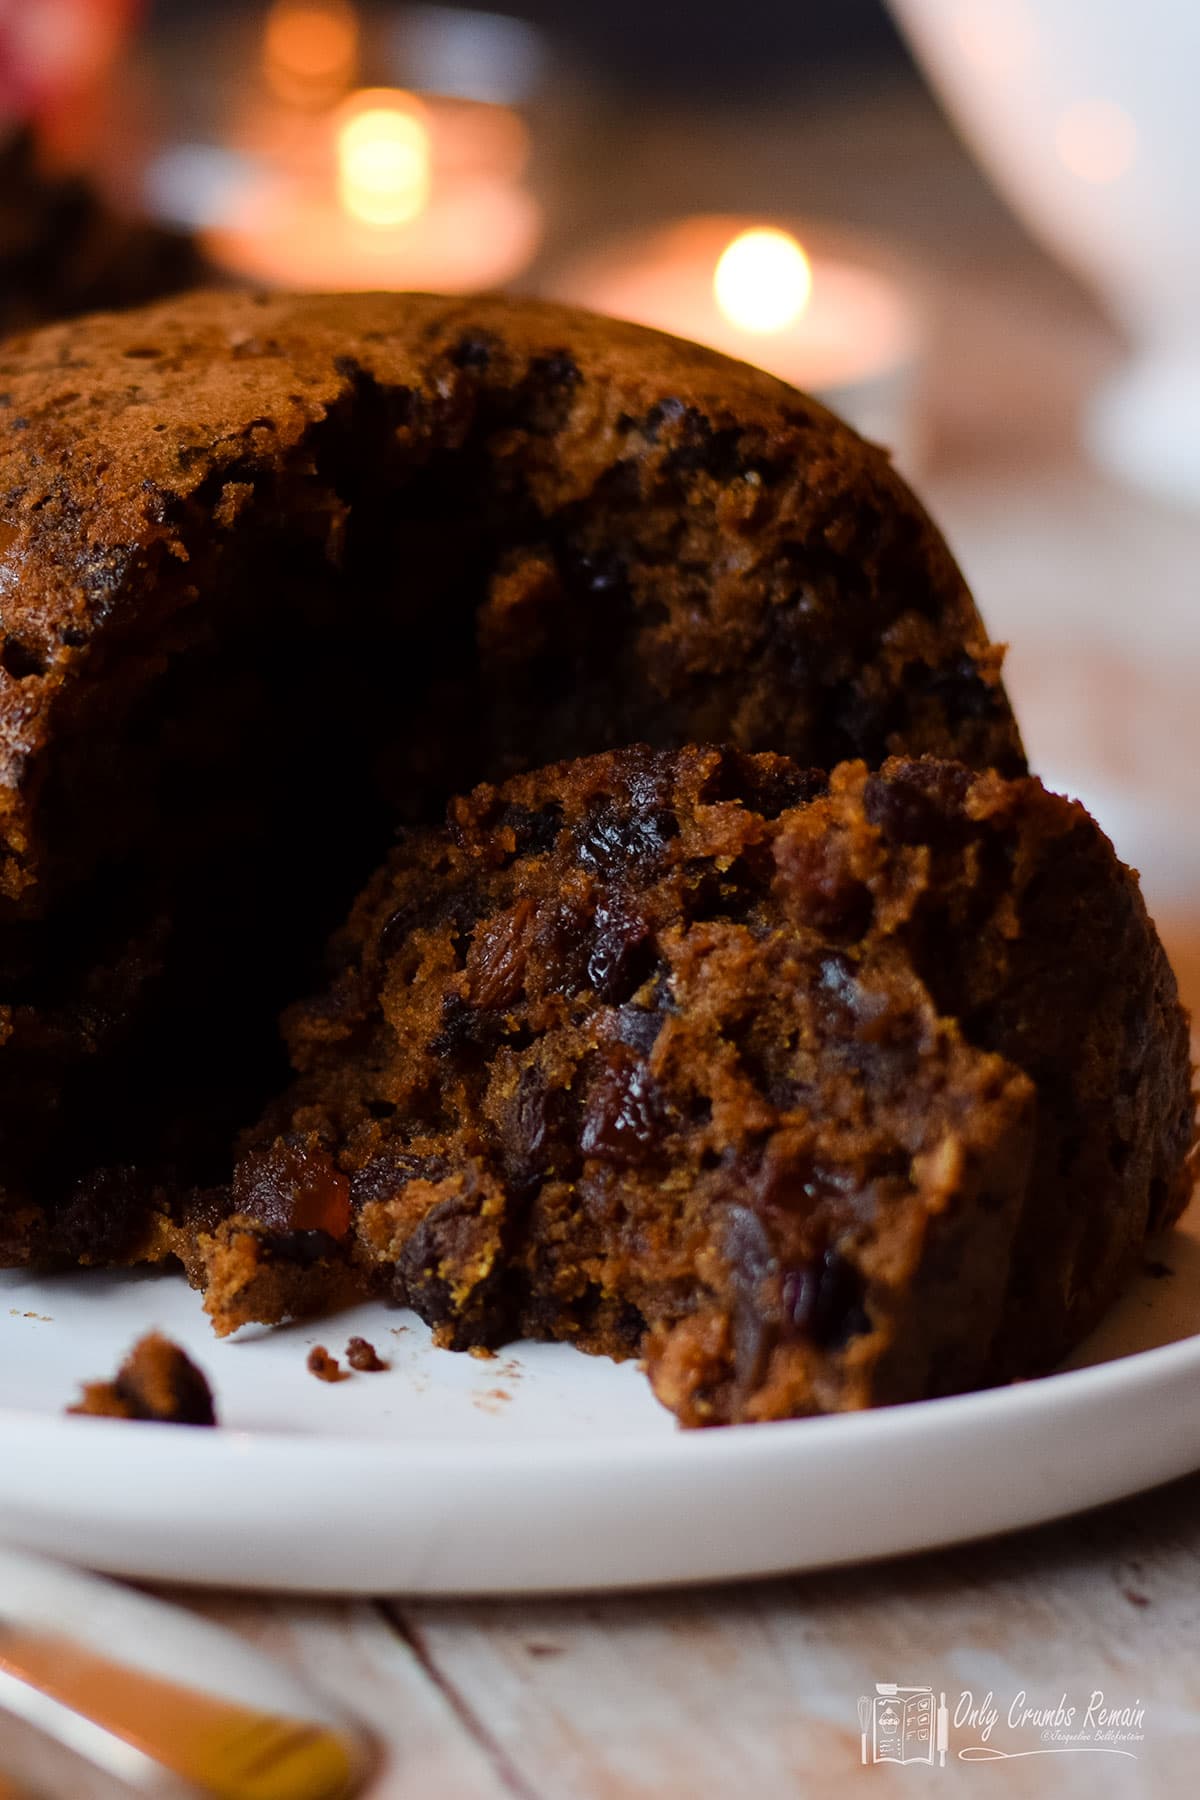 Chocolate orange Christmas pudding with slice lying on its side on the serving plate.